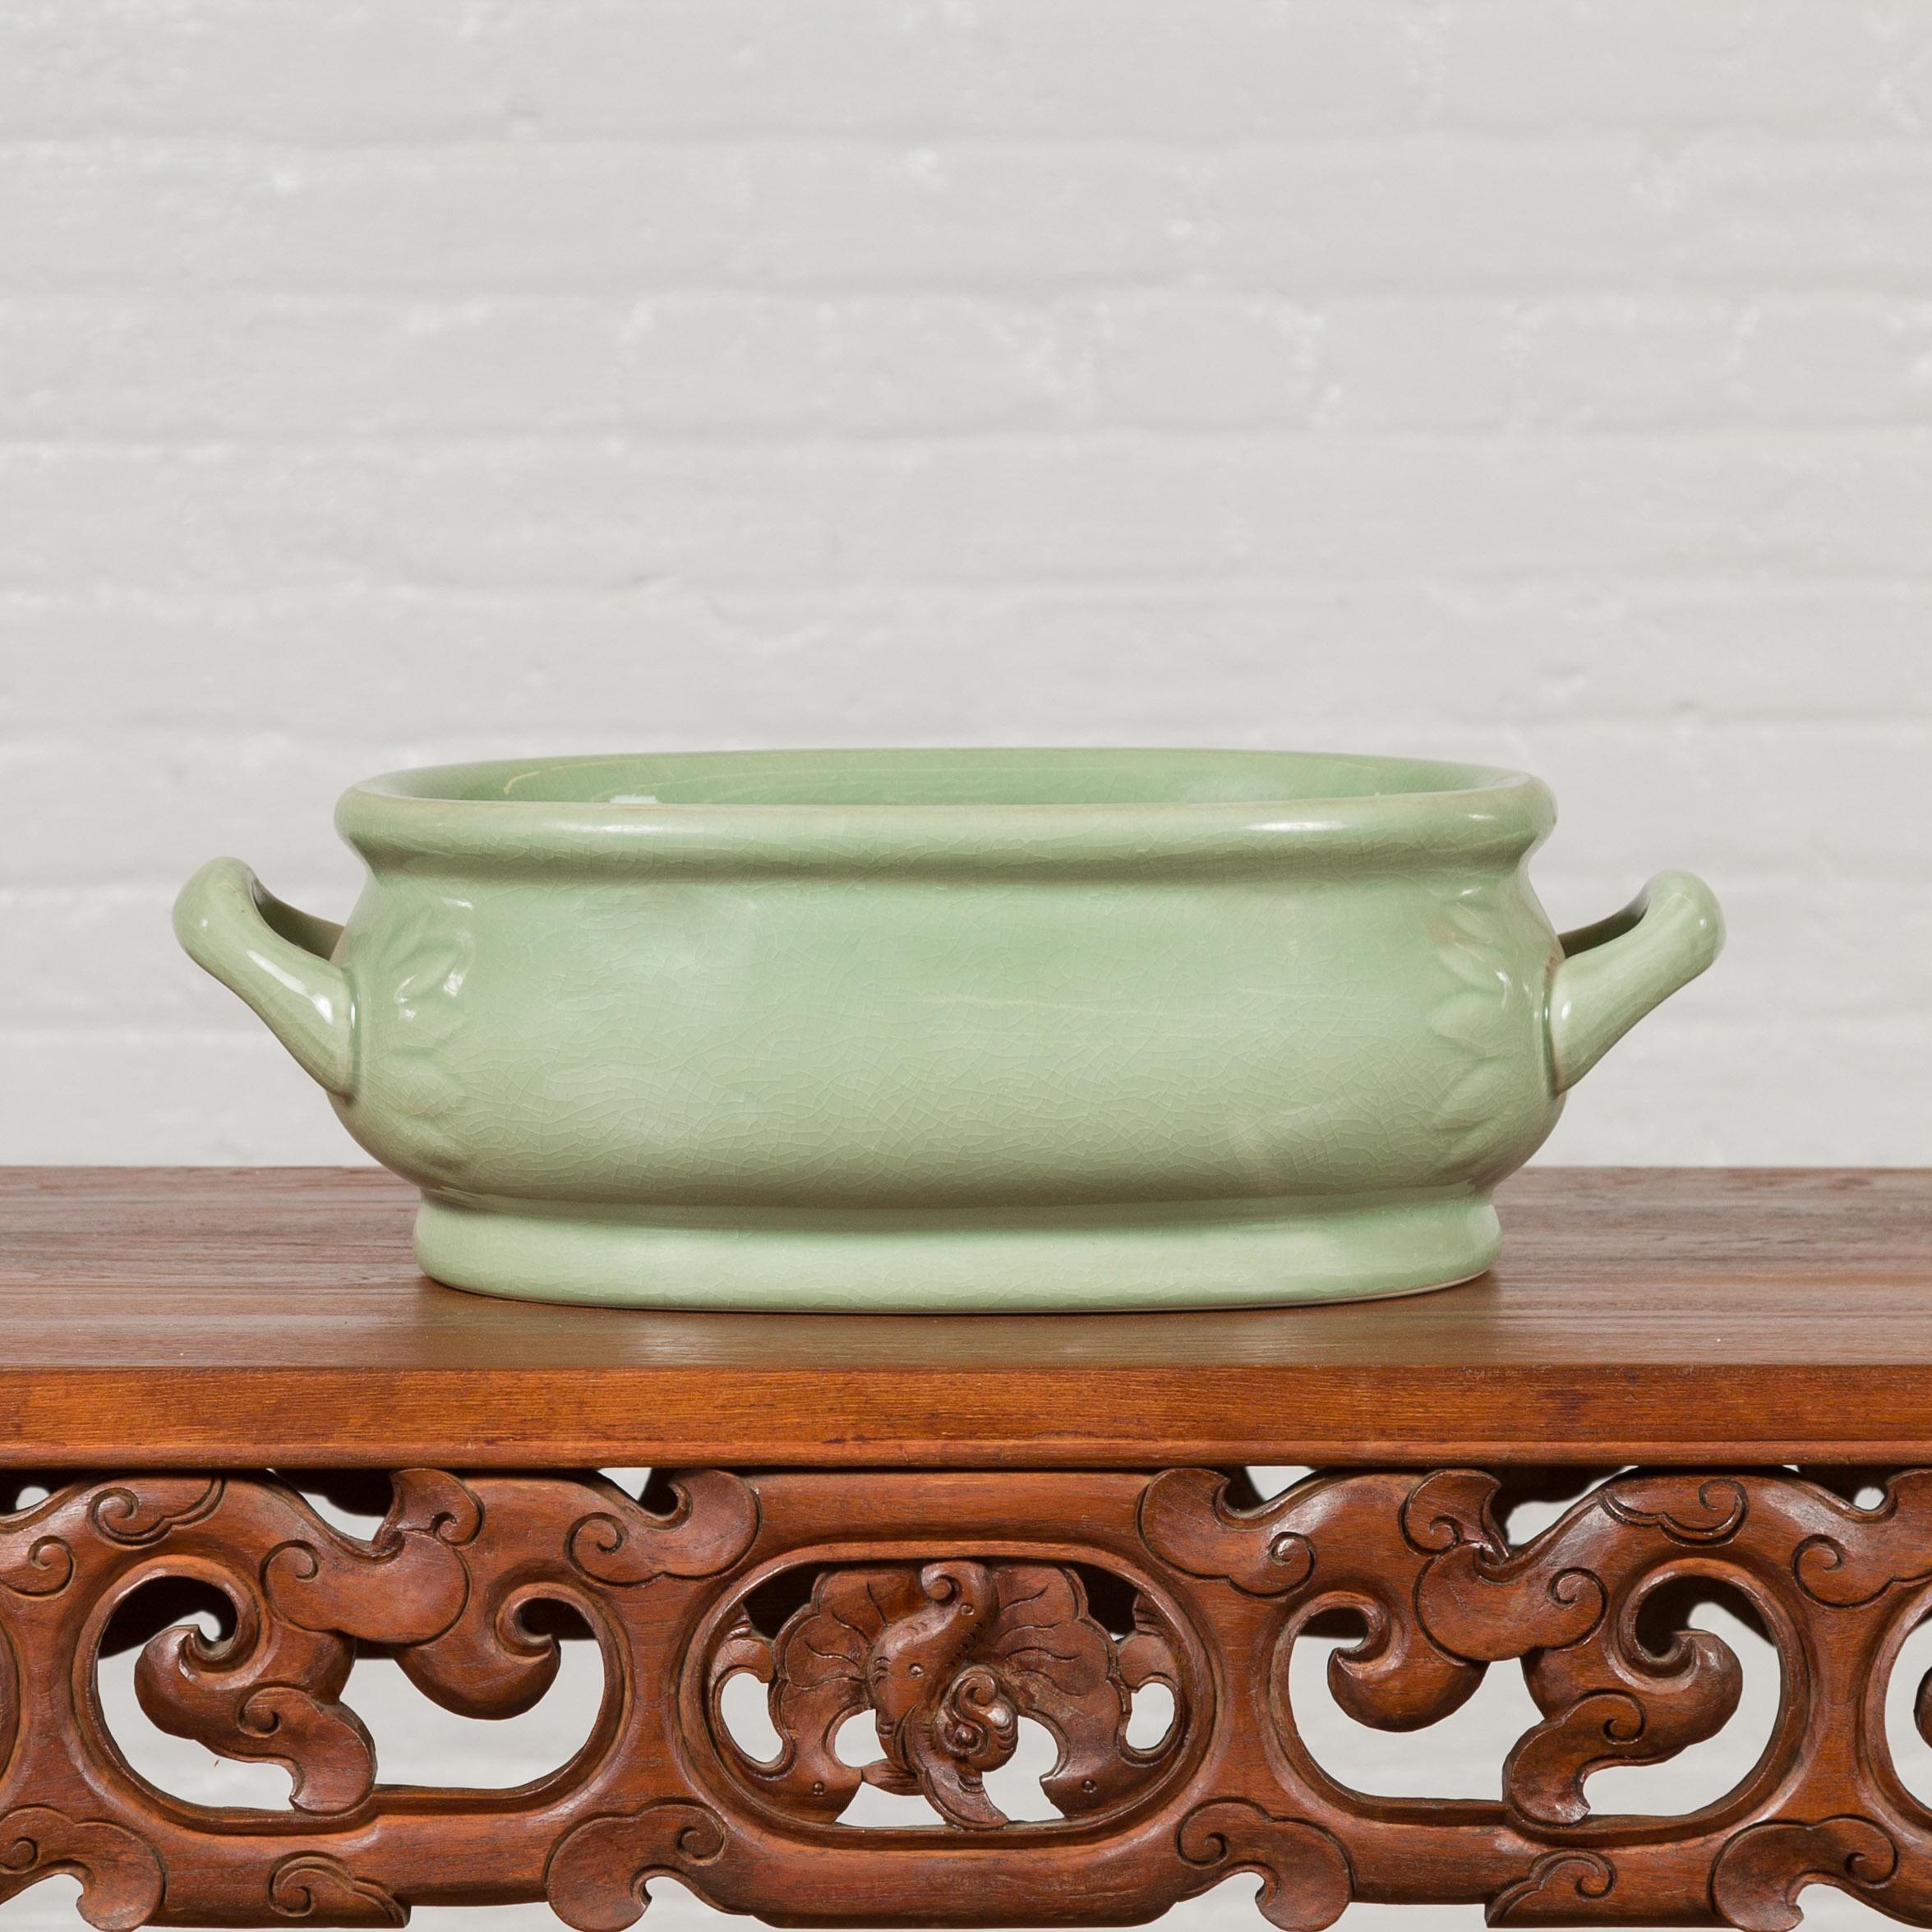 A Chinese vintage celadon foot bath from the mid-20th century, with two handles and foliage motifs. Created in China during the midcentury period, this celadon foot bath features an oval shape topped with a thick lip. The body, showcasing a slightly